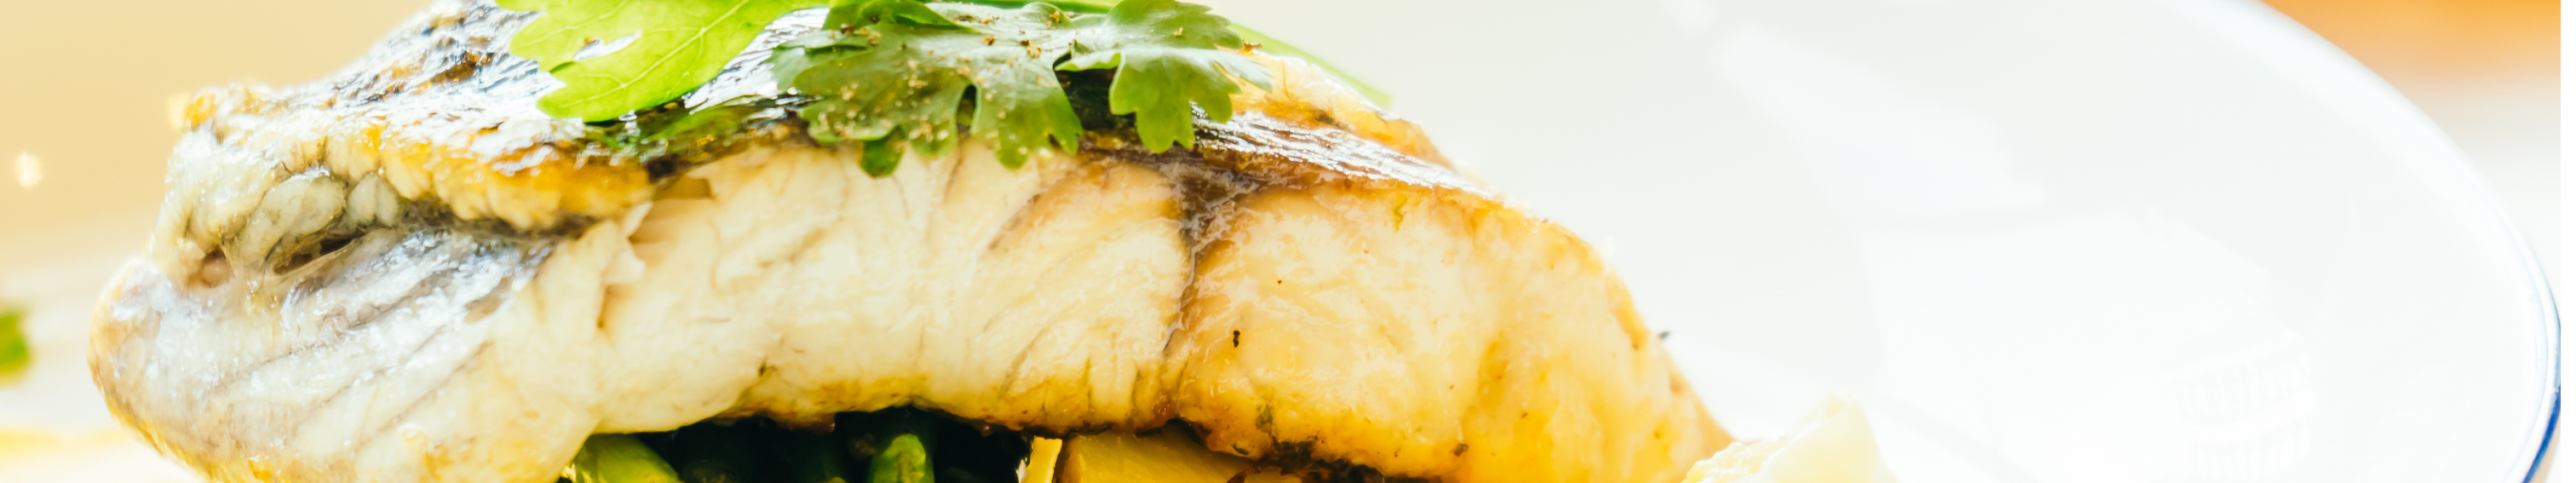 Fish with Olive Tapenade - Steve Costi's Seafood